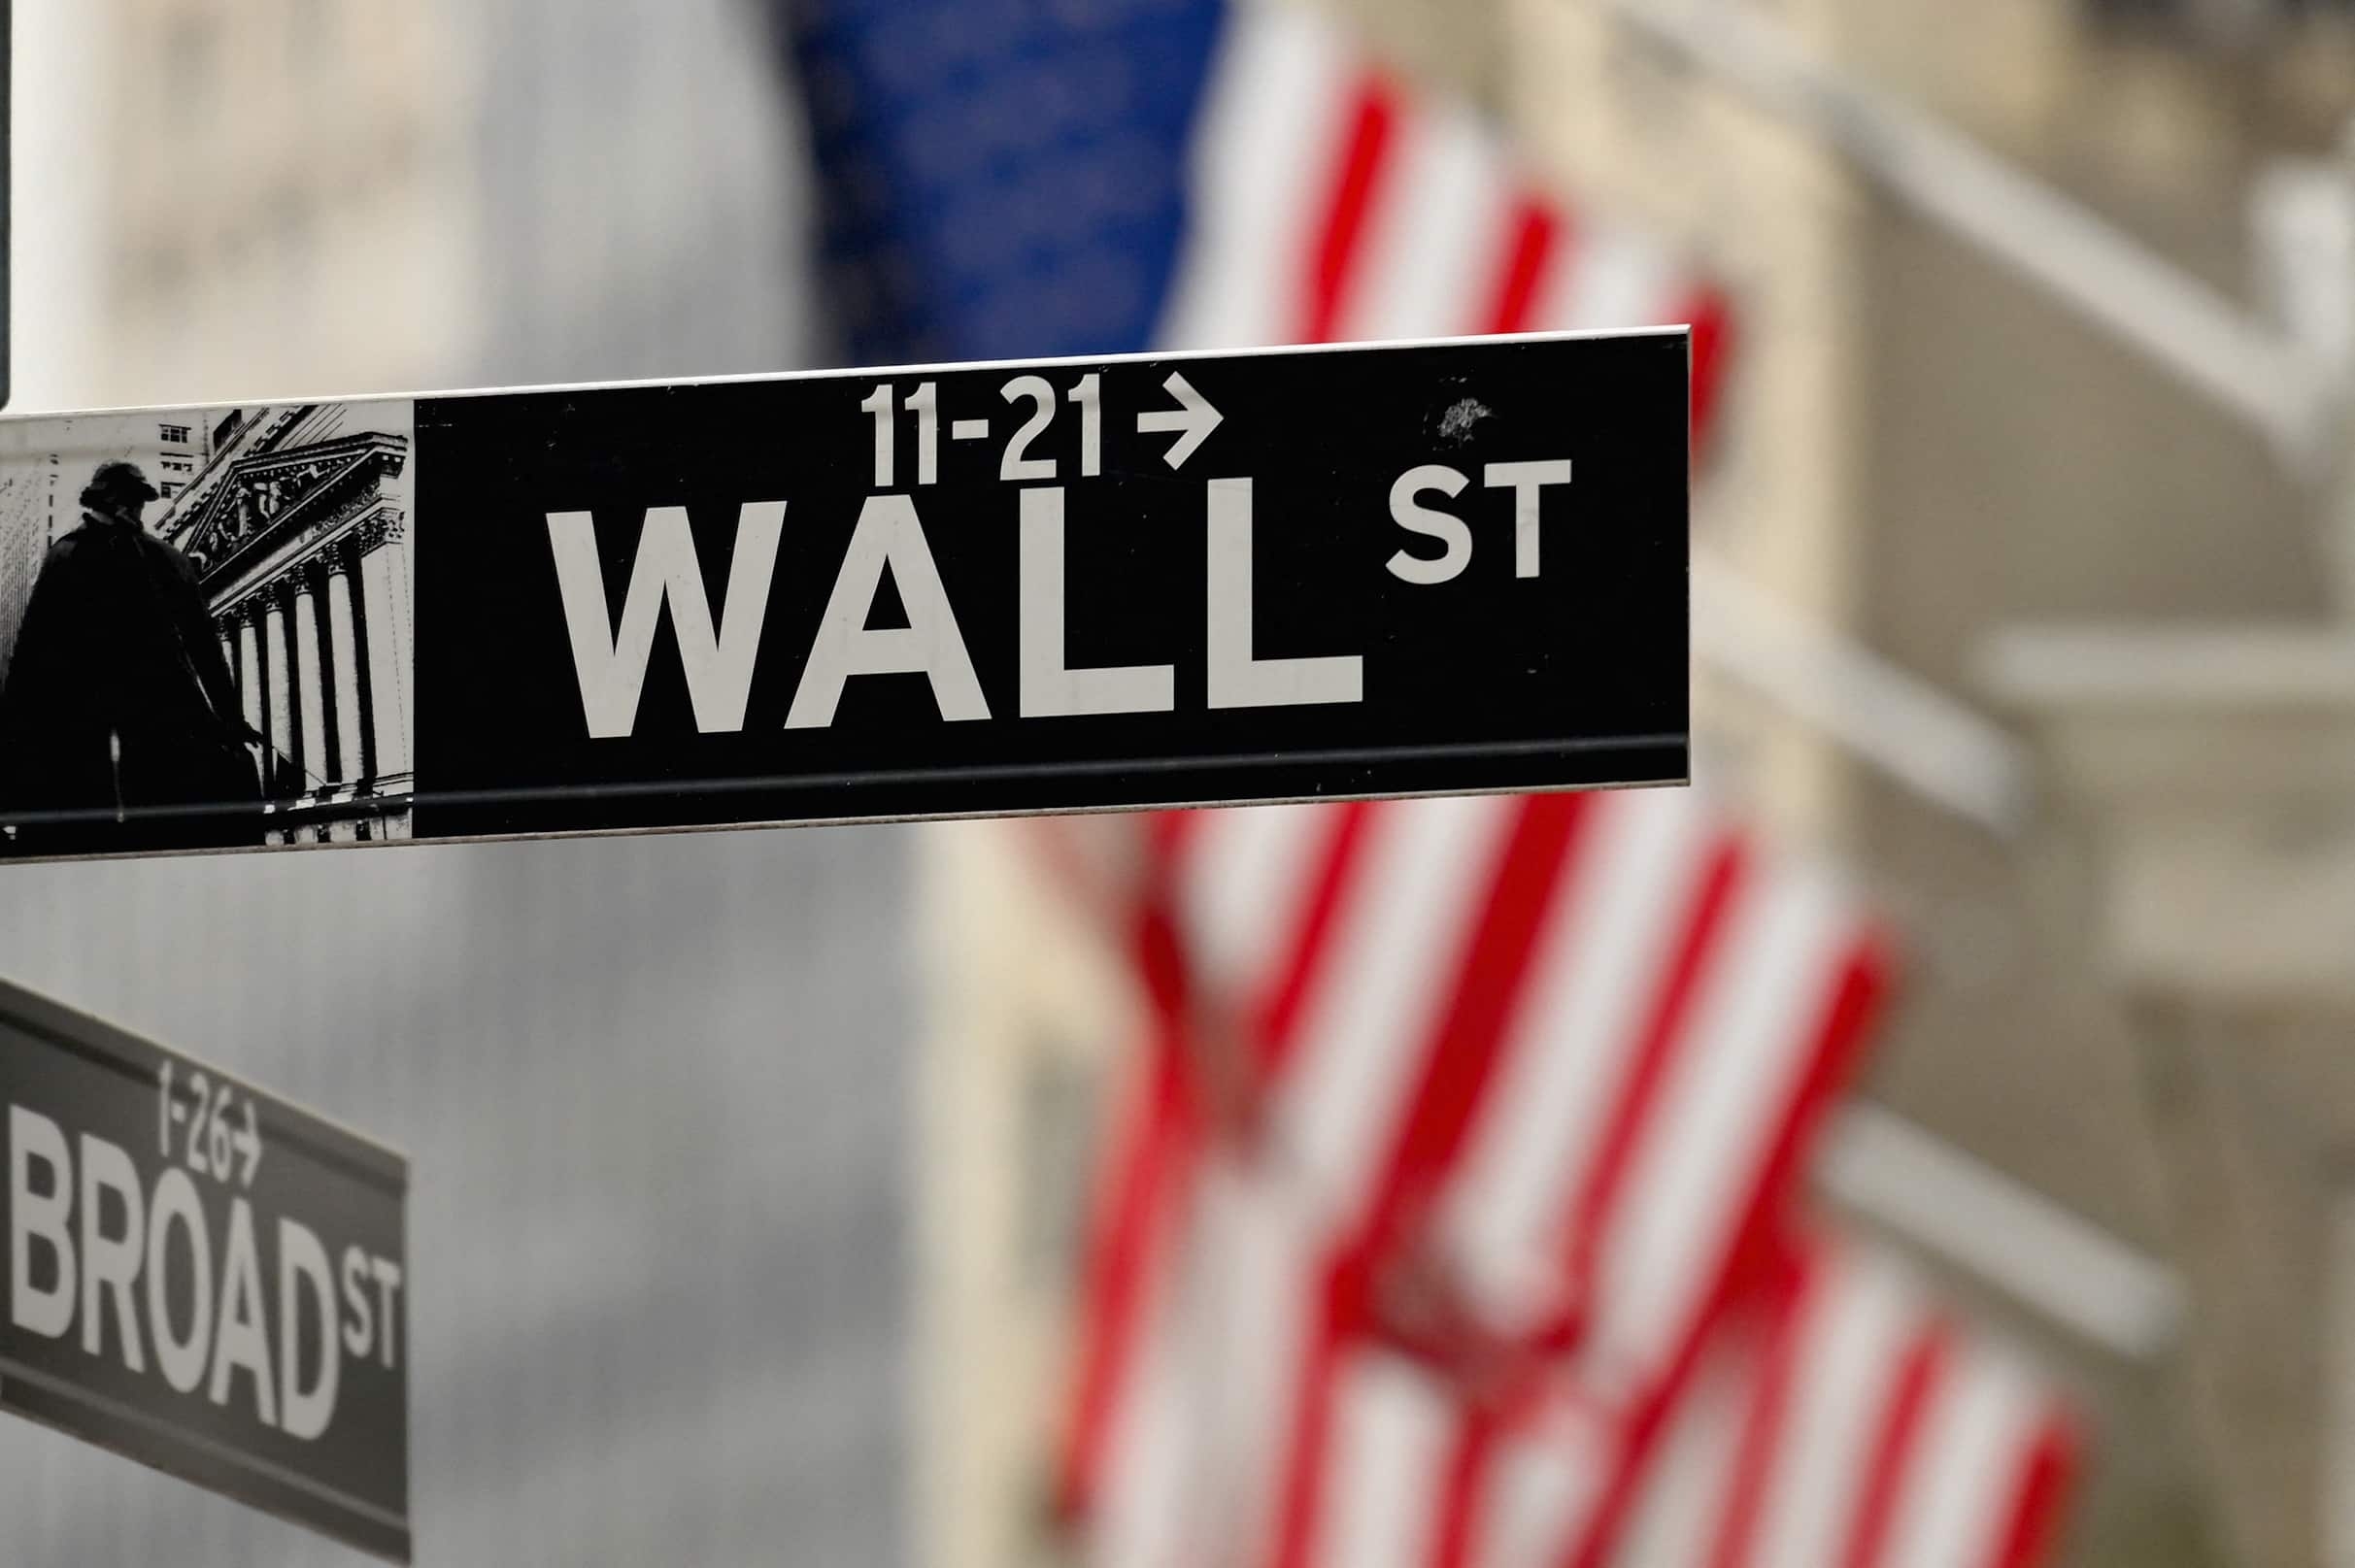 Wall Street stocks finished lower while bond yields and the dollar rose on Thursday as investors worried about the potential for aggressive US policy tightening as other central banks around the world moved to reduce support. The Dow Jones Industrial Average fell 113.36 points, or 0.33 percent, to 34,451.23 while the S&amp;P 500 lost 54 points, or 1.21 percent, to 4,392.59 and the Nasdaq Composite dropped 292.51 points, or 2.14 percent, to 13,351.08.